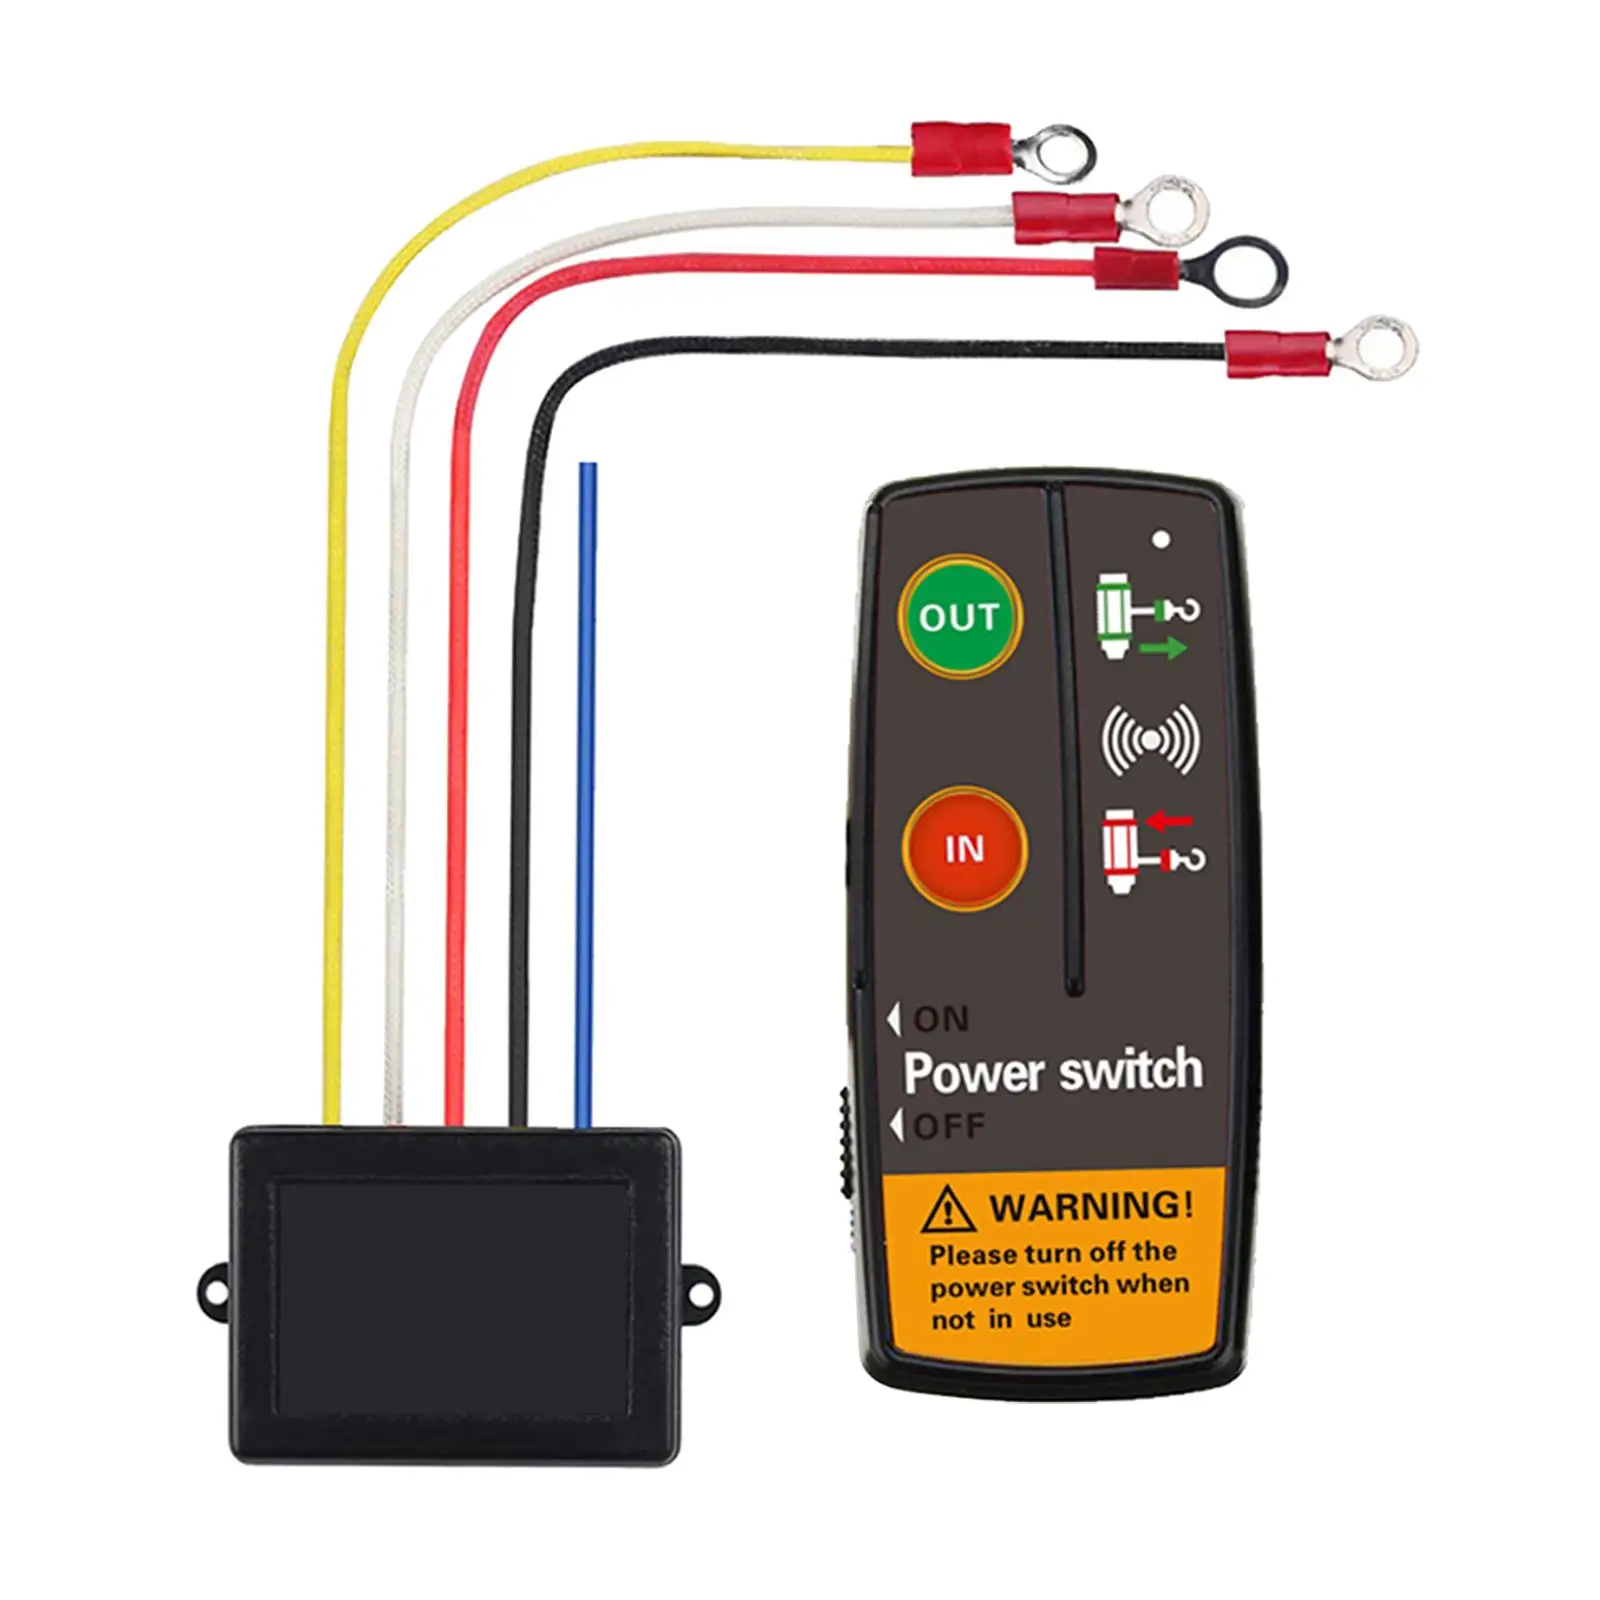 Wireless Winch Remote Control Set Repair Replaces for Truck ATV Vehicle